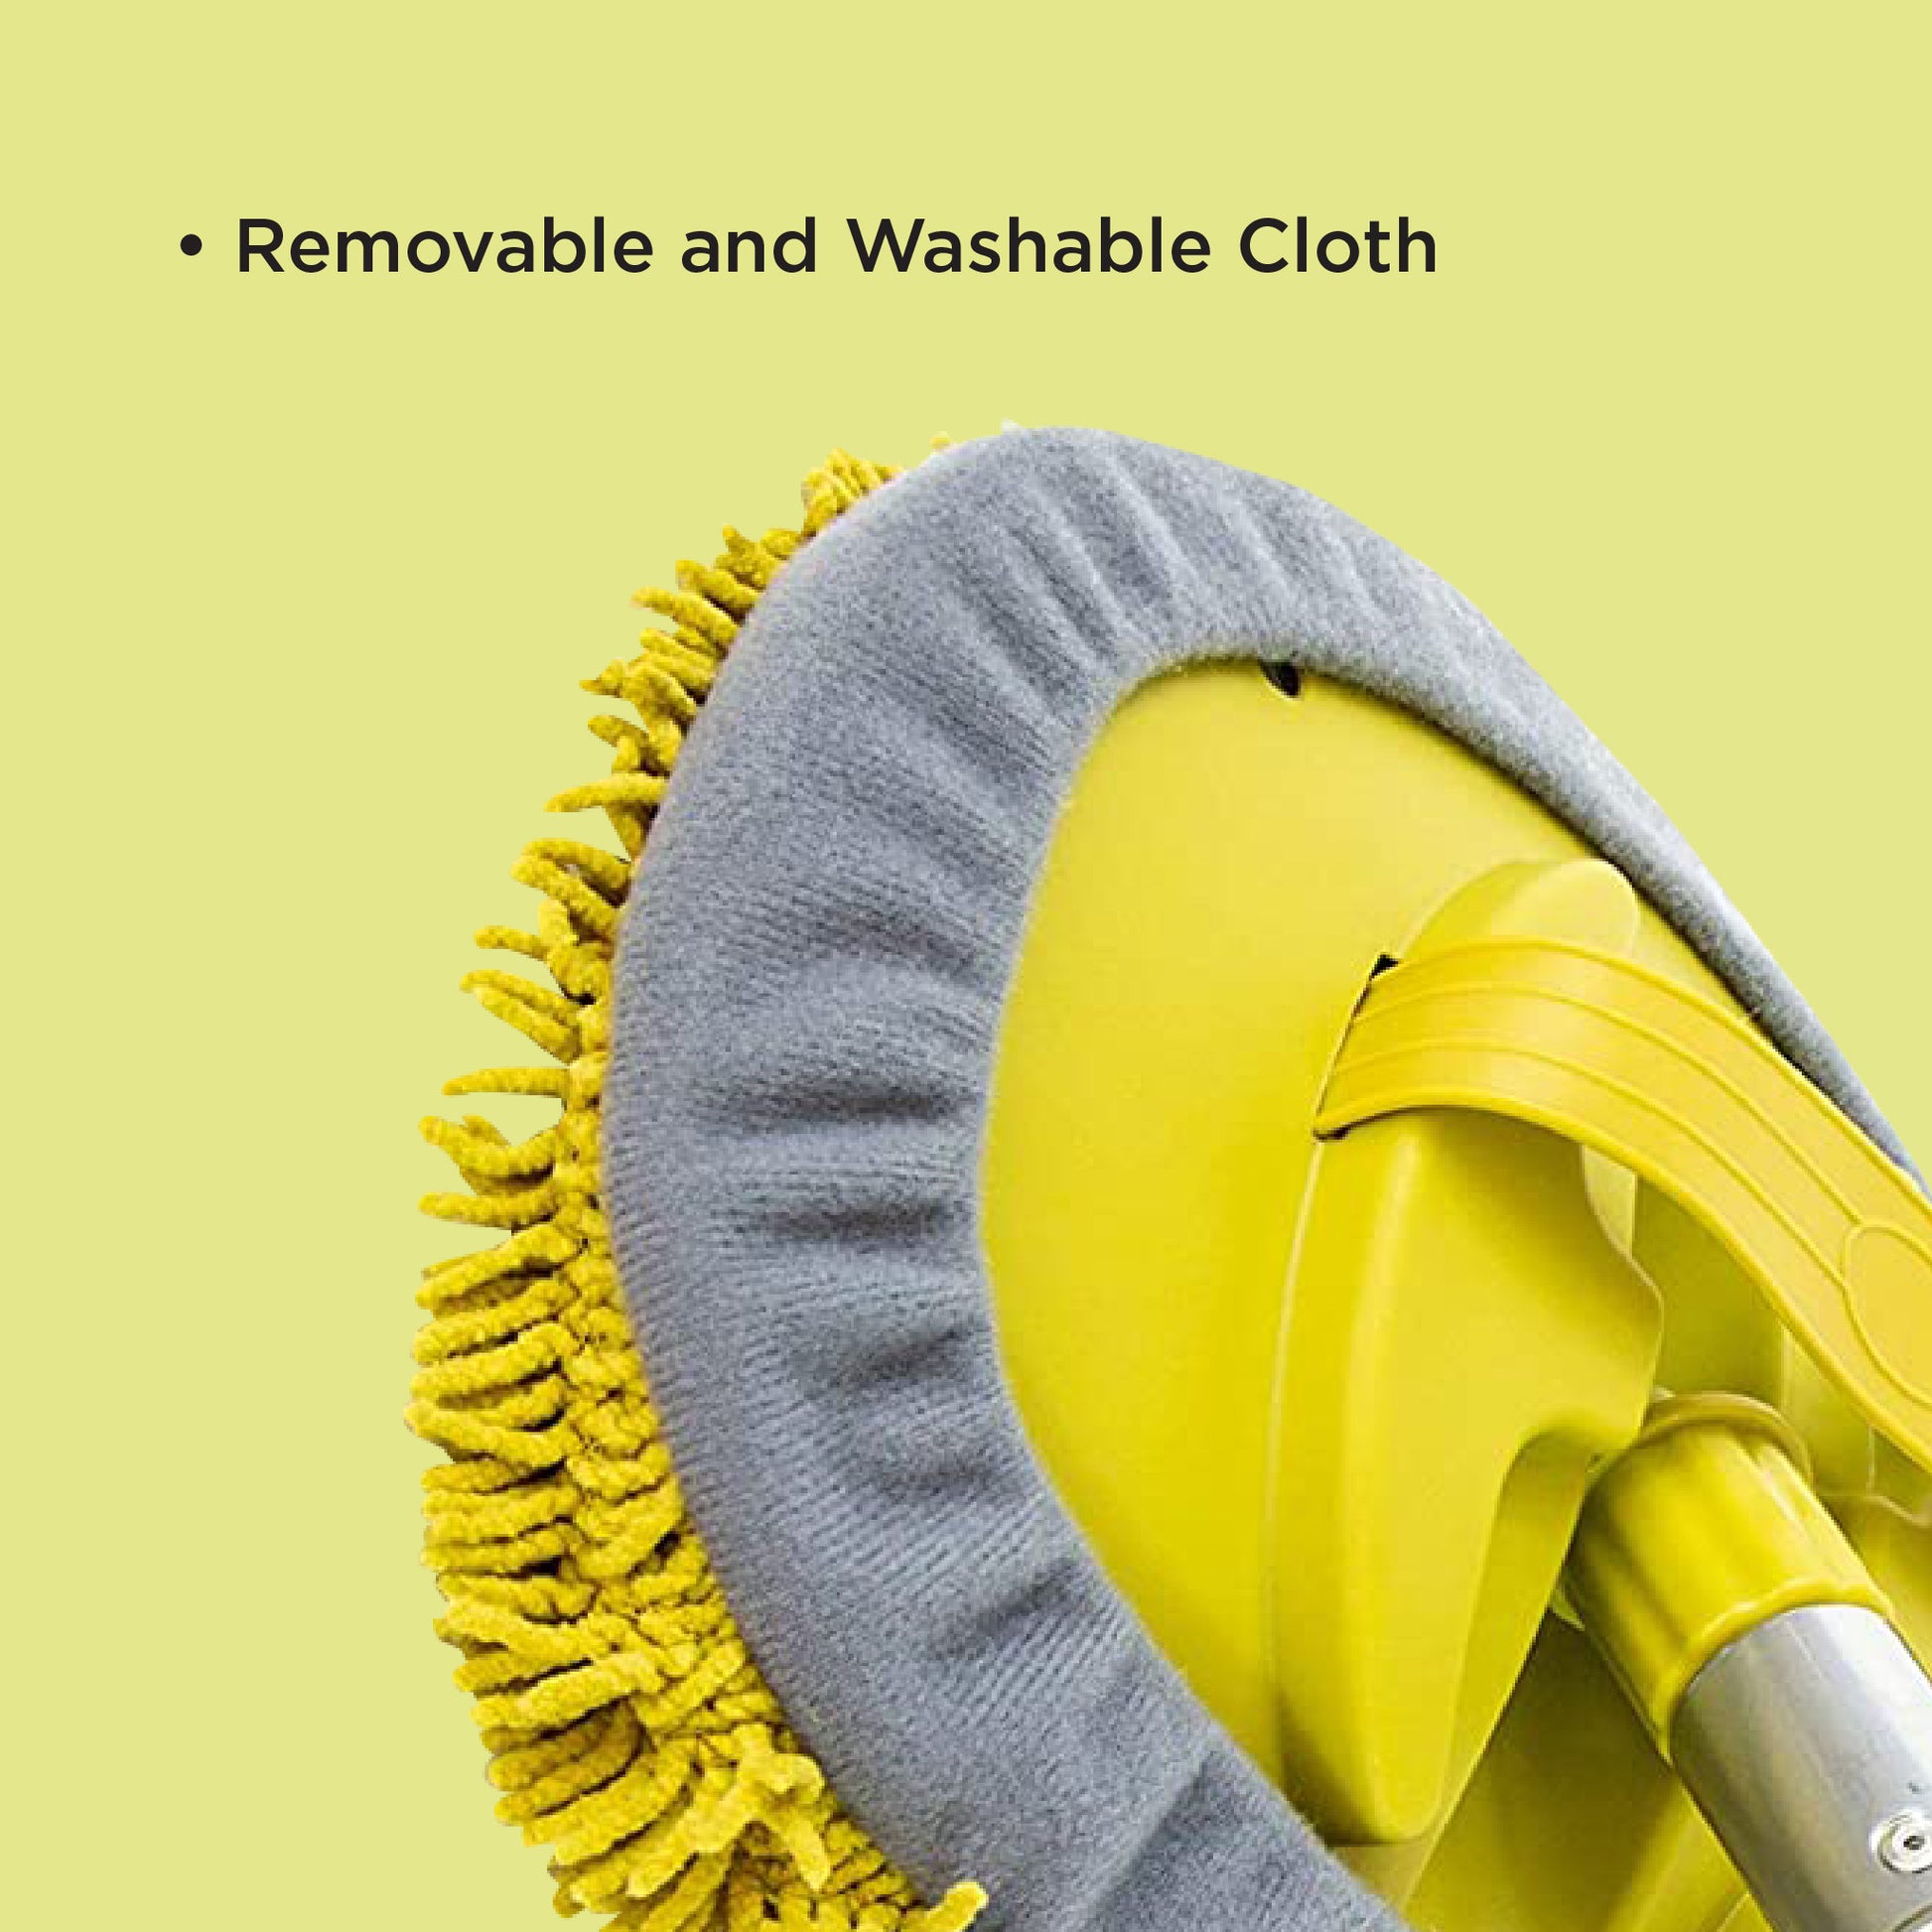 Removable and washable cloth cleaning head